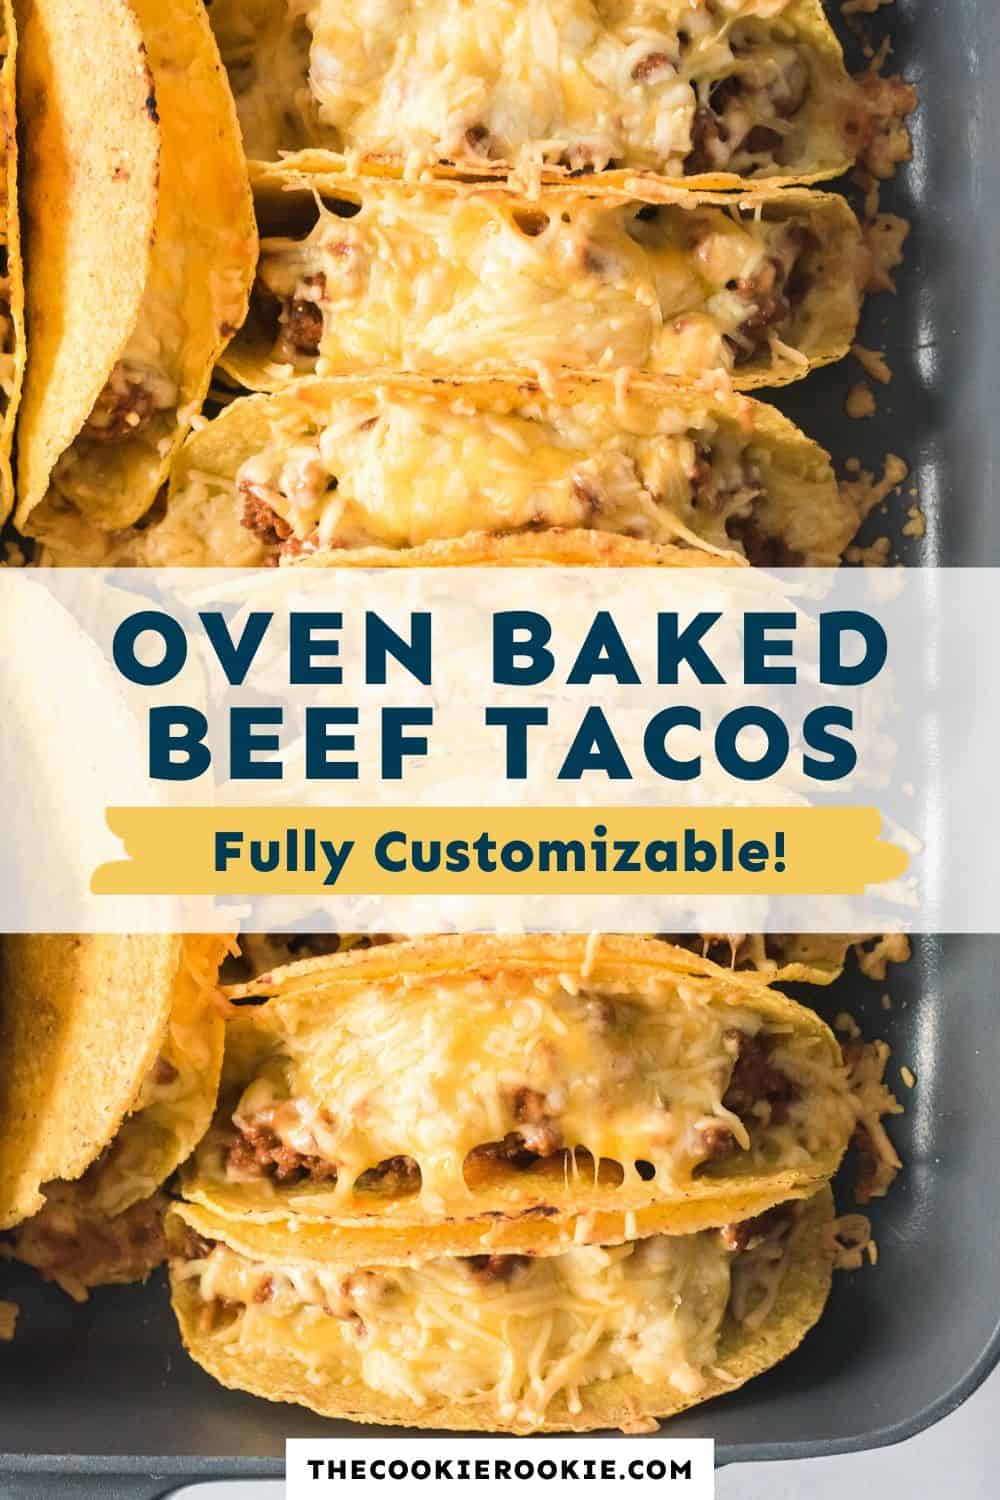 Baked Ground Beef Taco Recipe - The Cookie Rookie®